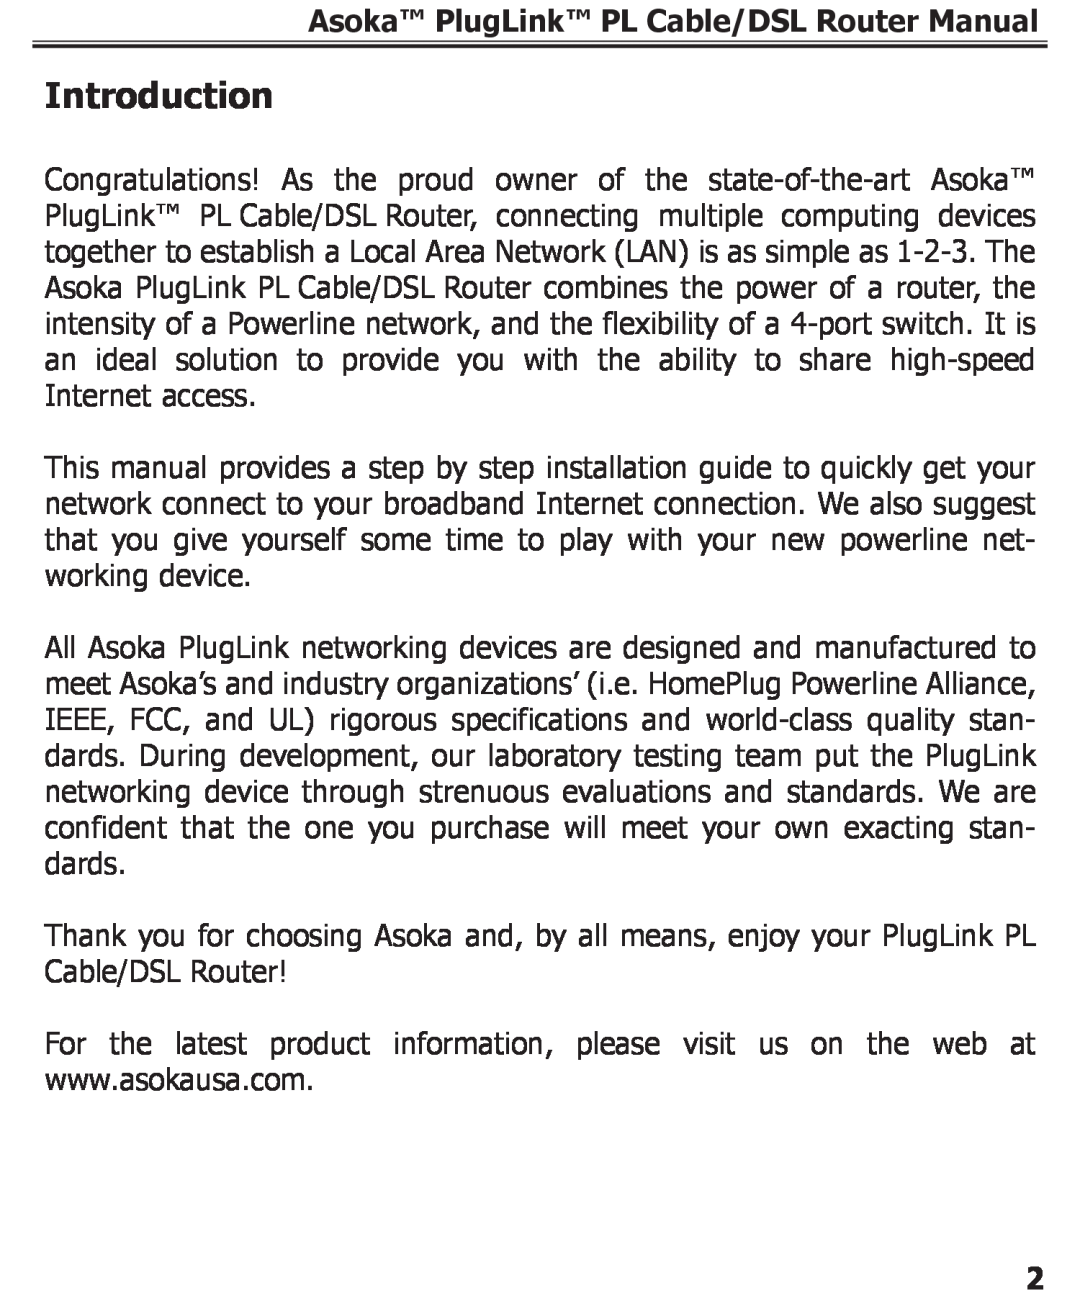 Asoka PL9920-BBR specifications Introduction, Asoka PlugLink PL Cable/DSL Router Manual 